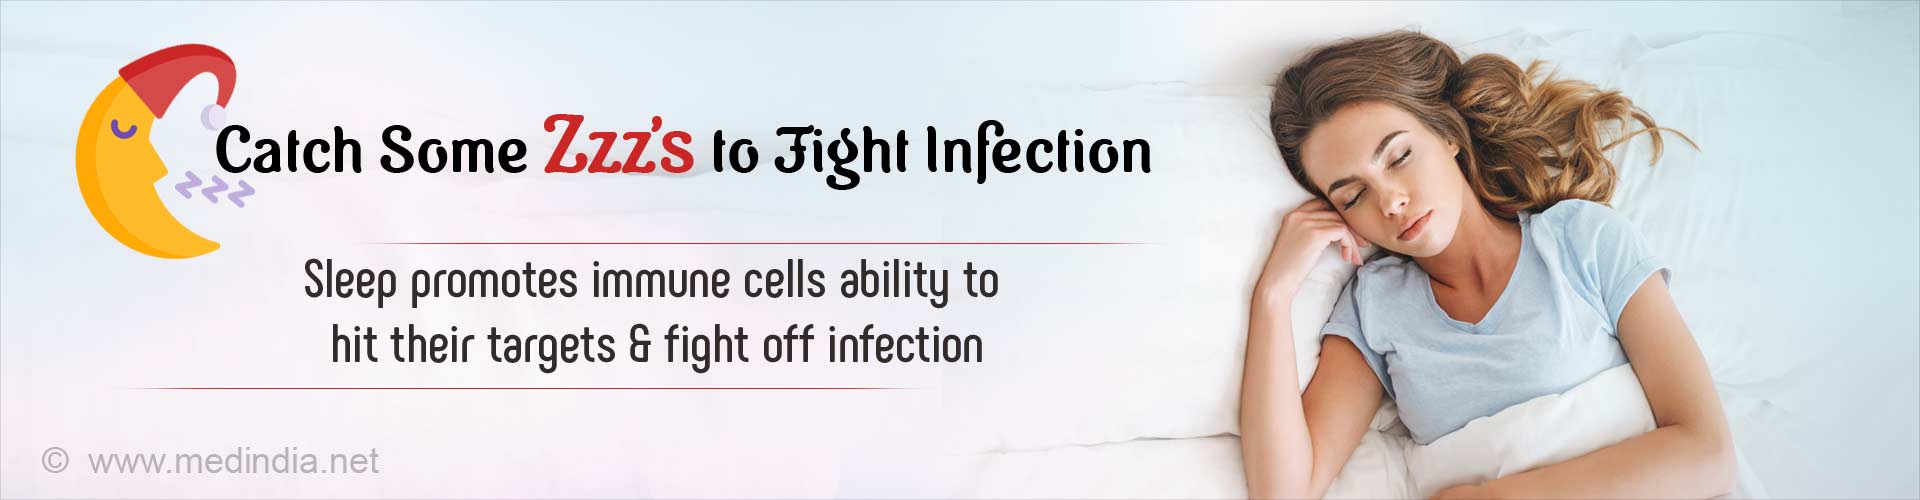 Catch some Zzz's to fight infection. Sleep promotes immune cells ability to hit their target and fight off infection.